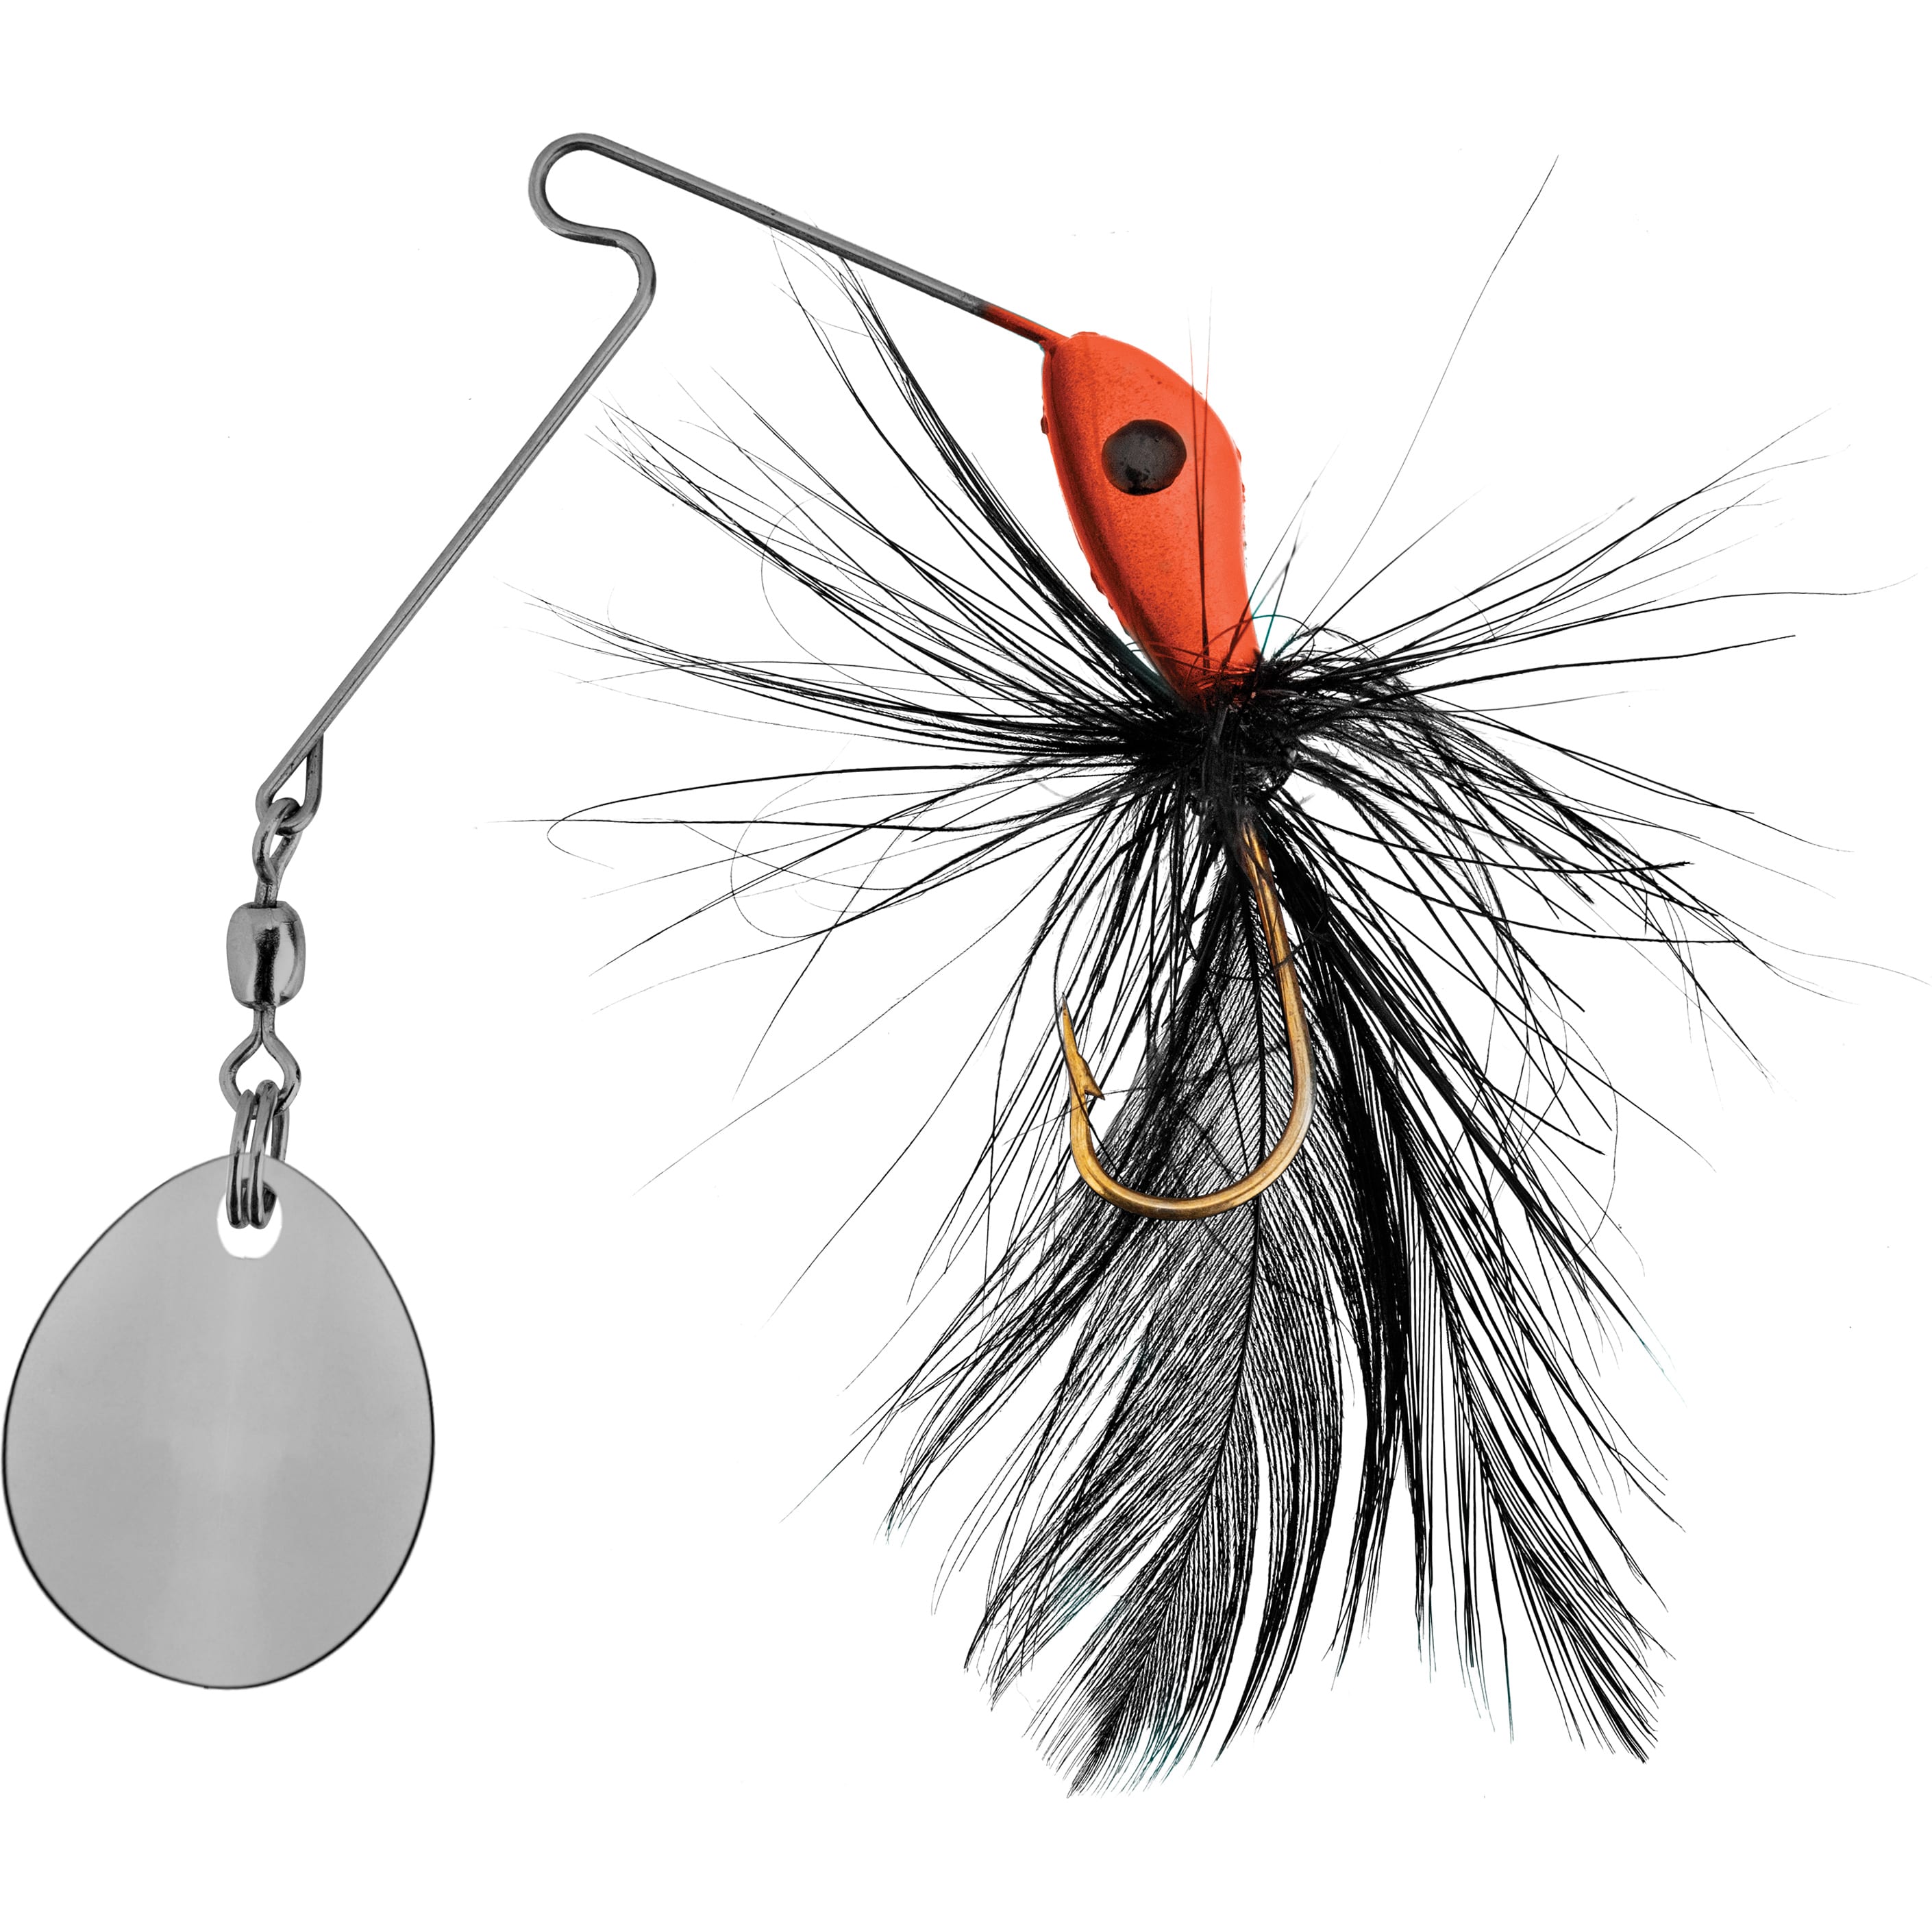 ProFISHiency 5′ Krazy 2.0 Spincast Carded Combo with Lures - Cabelas